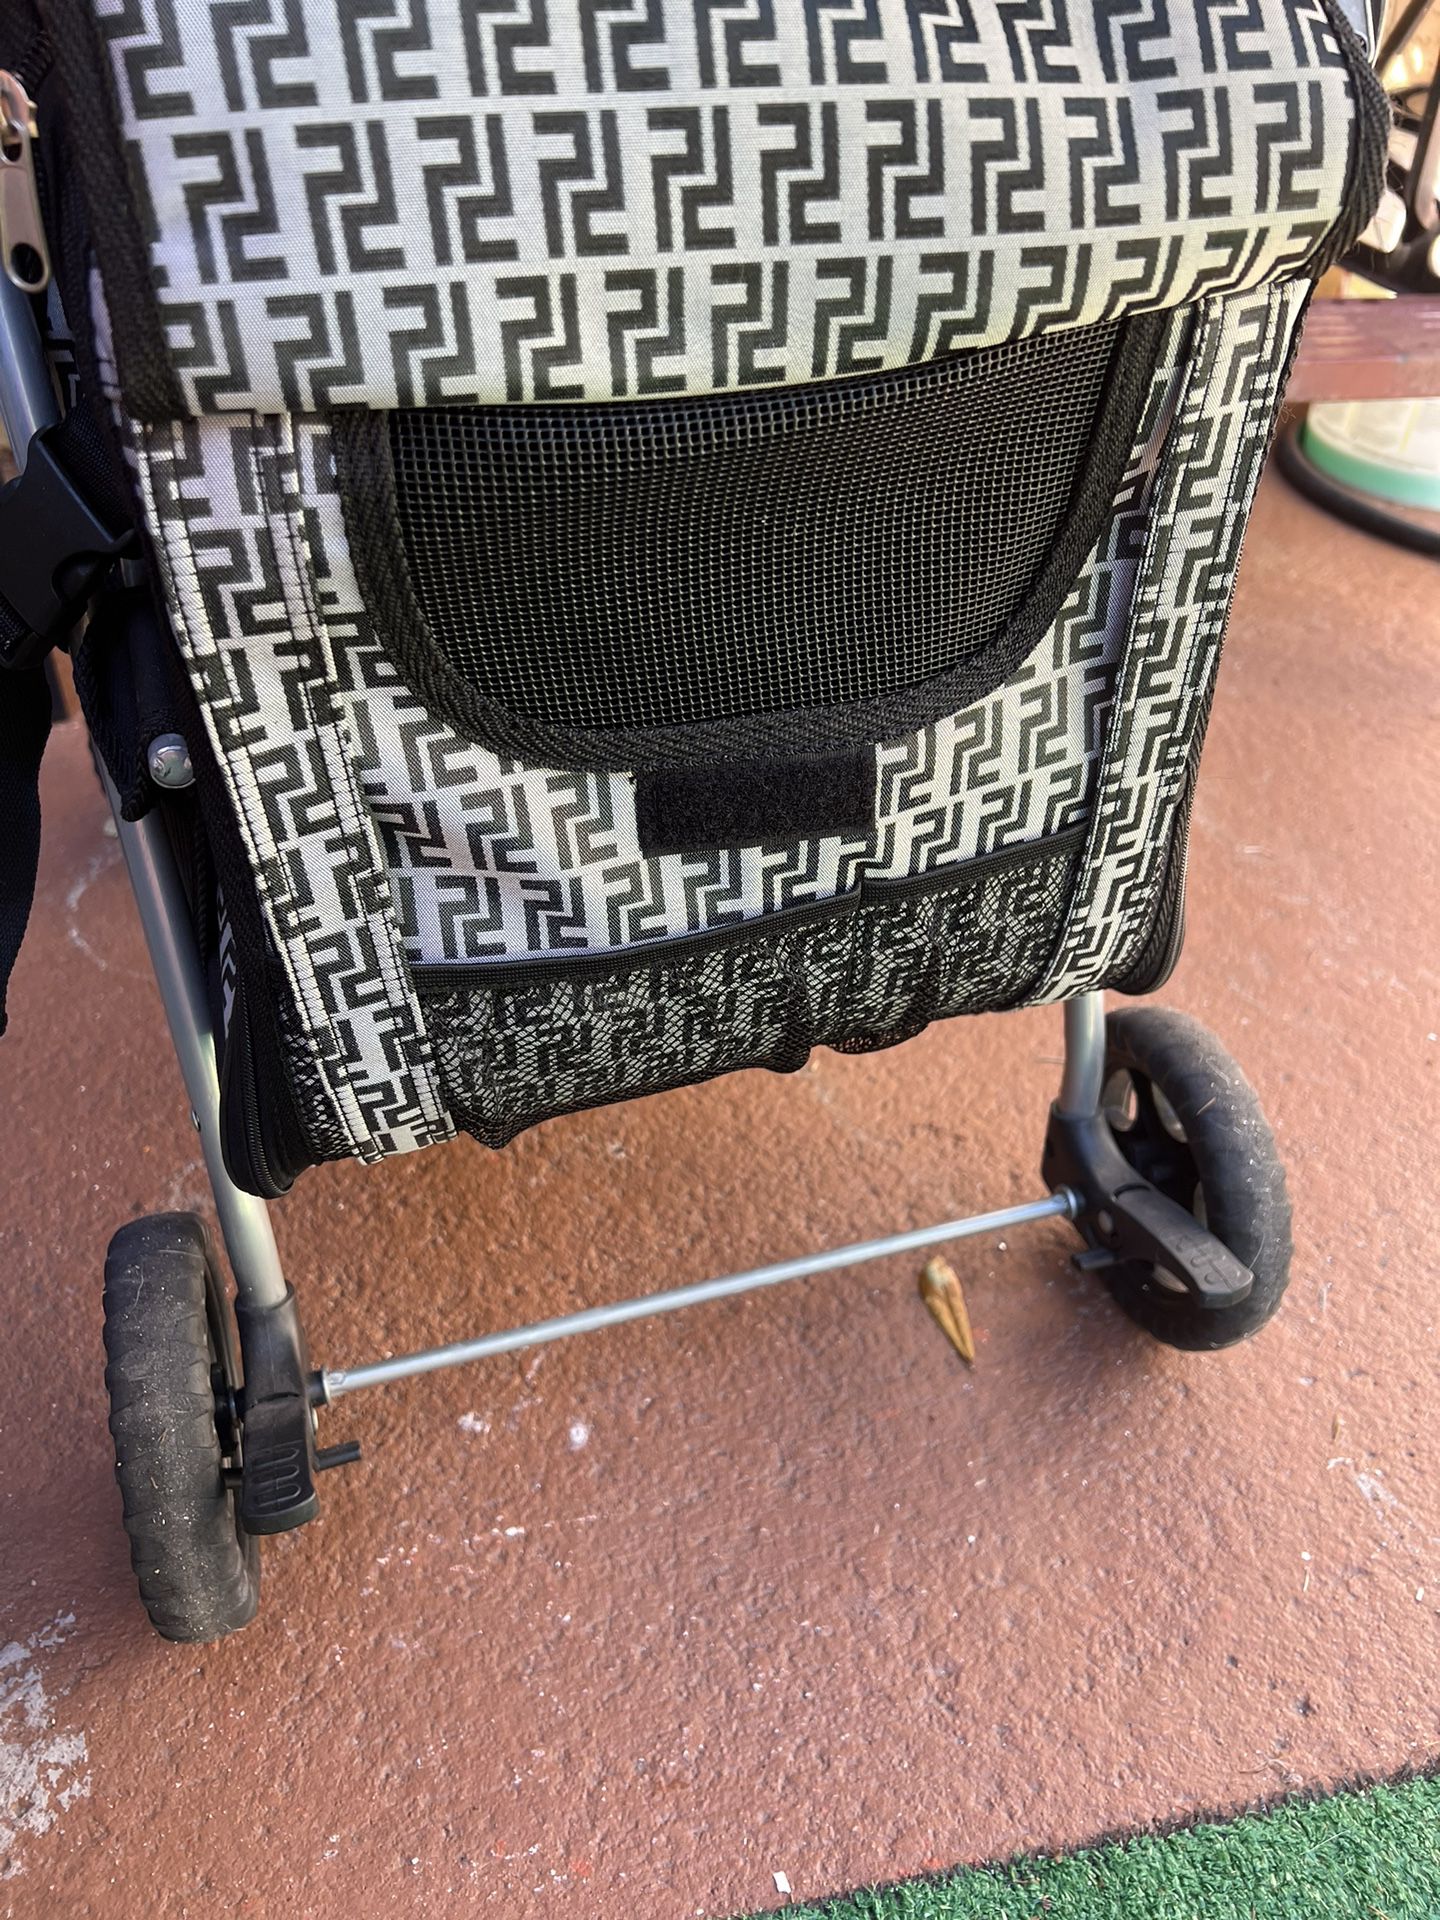 2/1 Fancy Dog/Cat Stroller With detachable Carrier